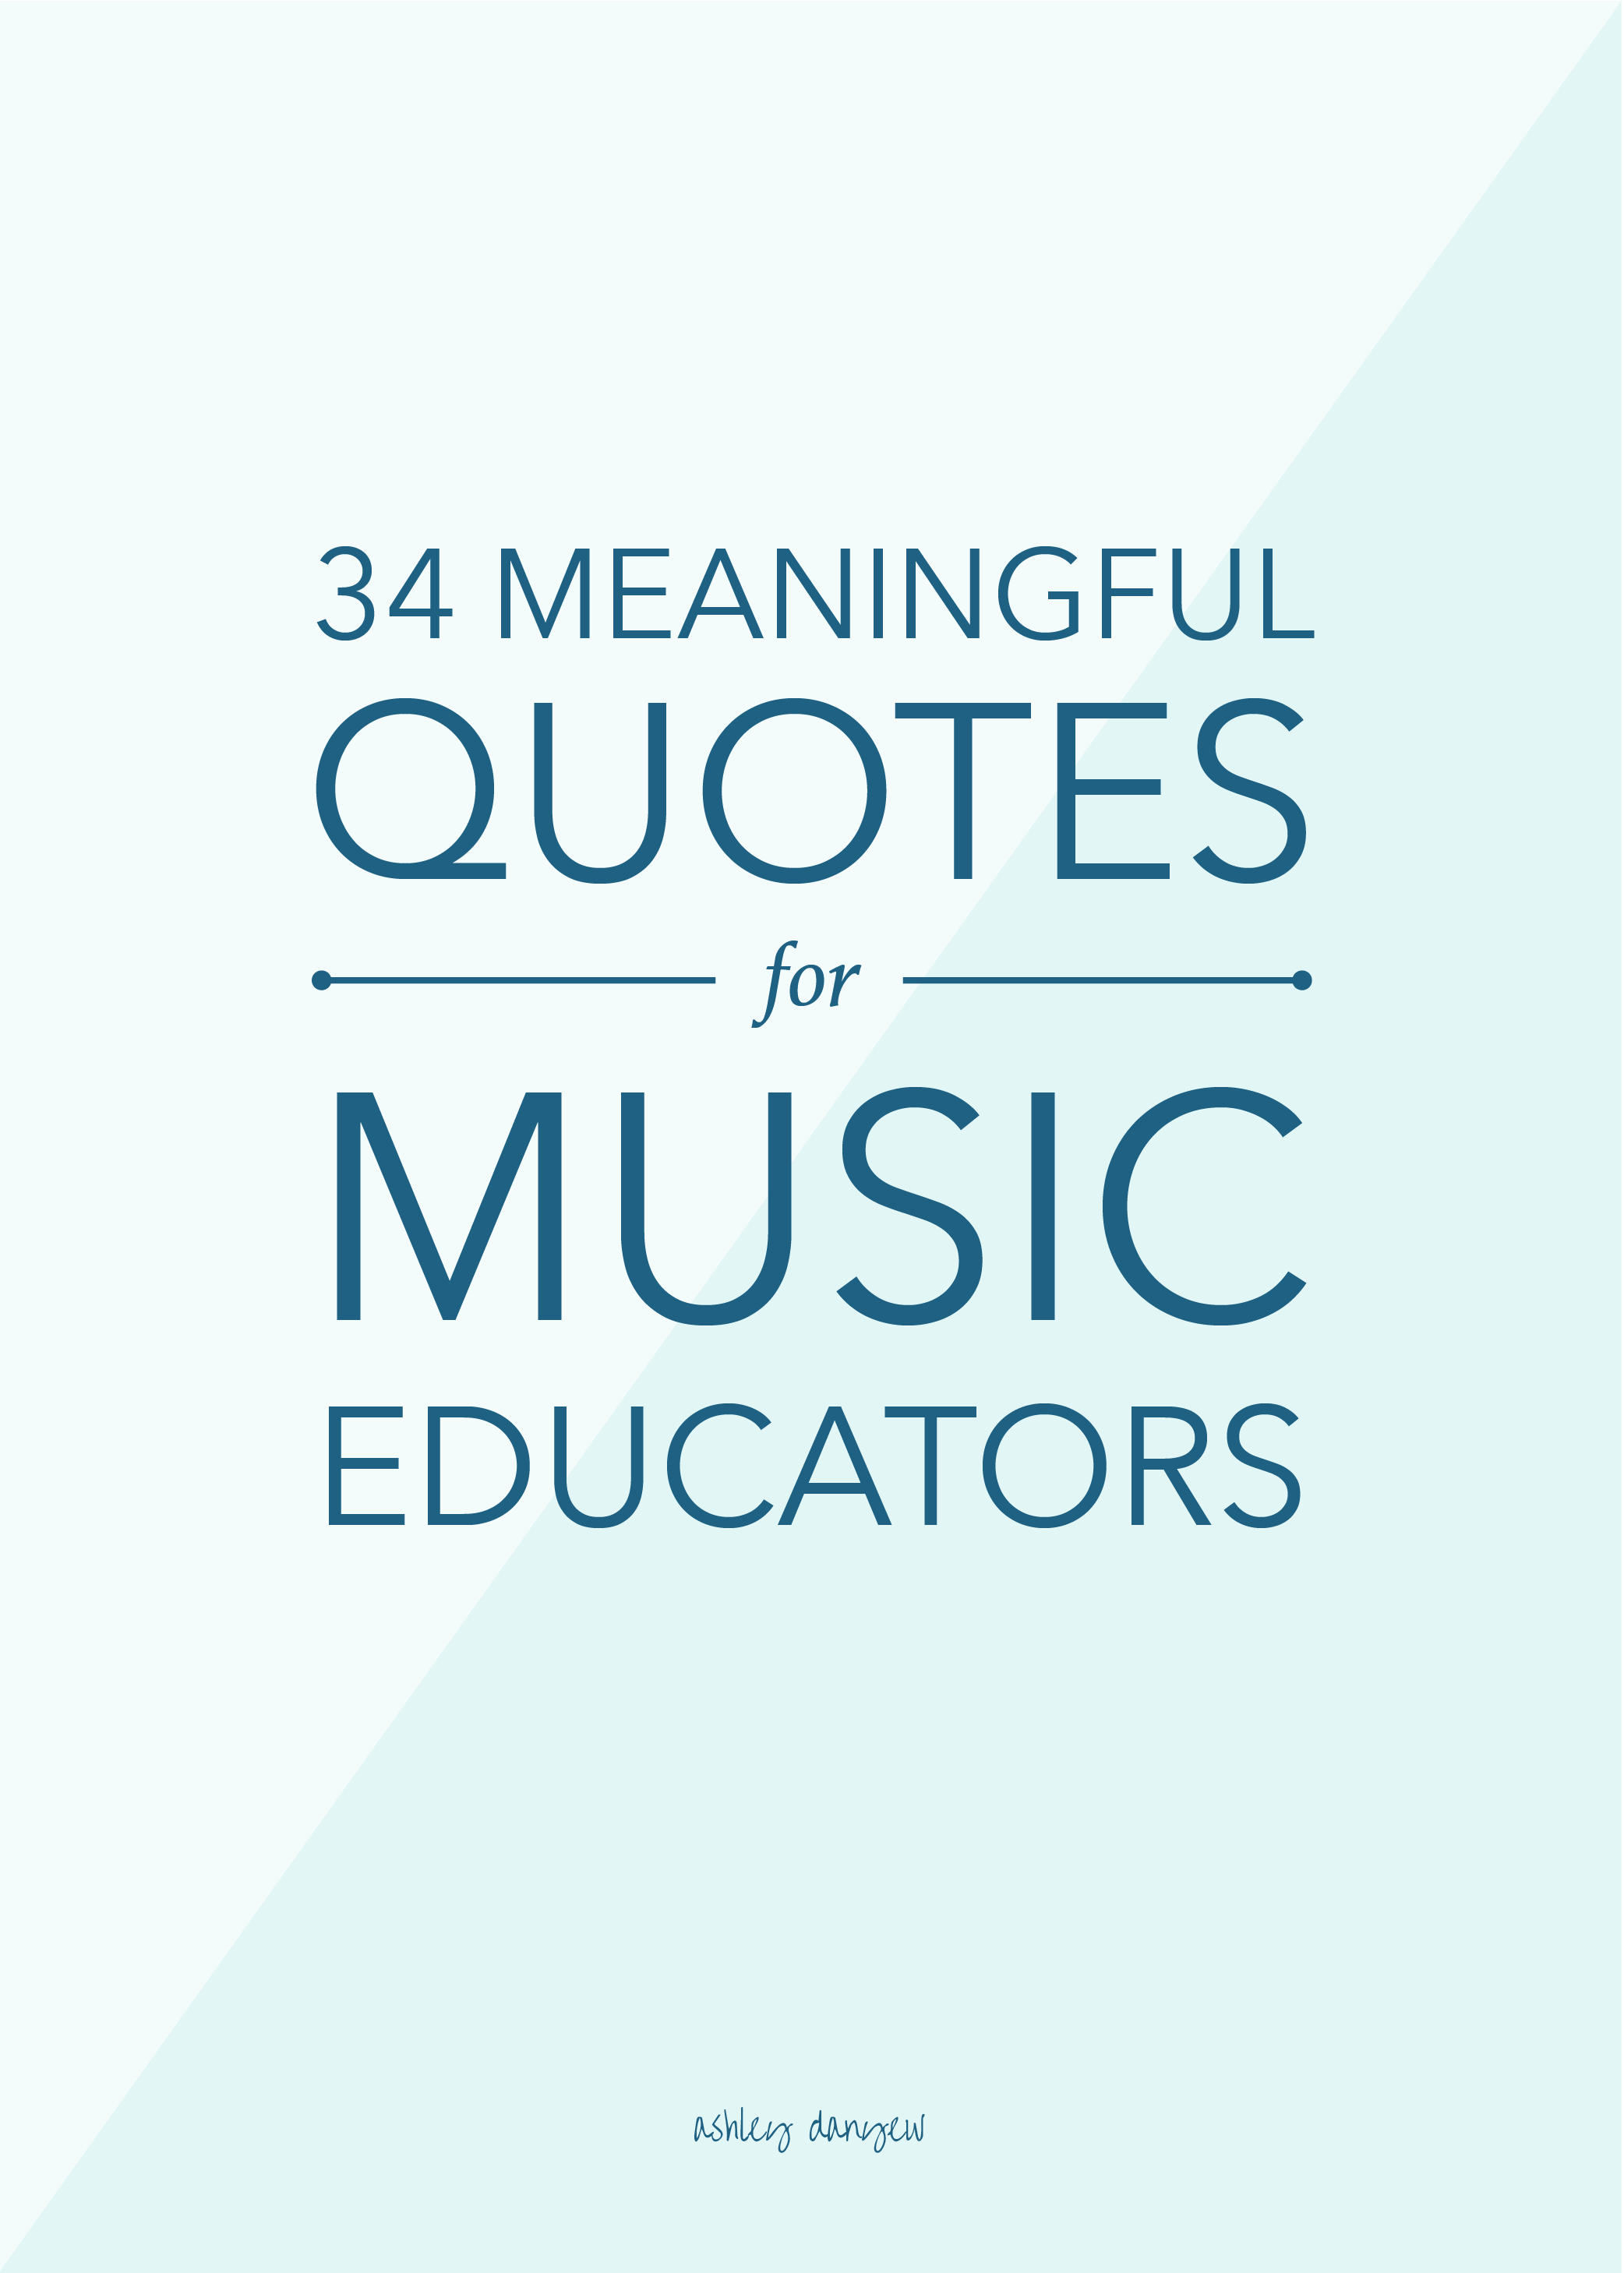 Copy of 34 Meaningful Quotes for Music Educators